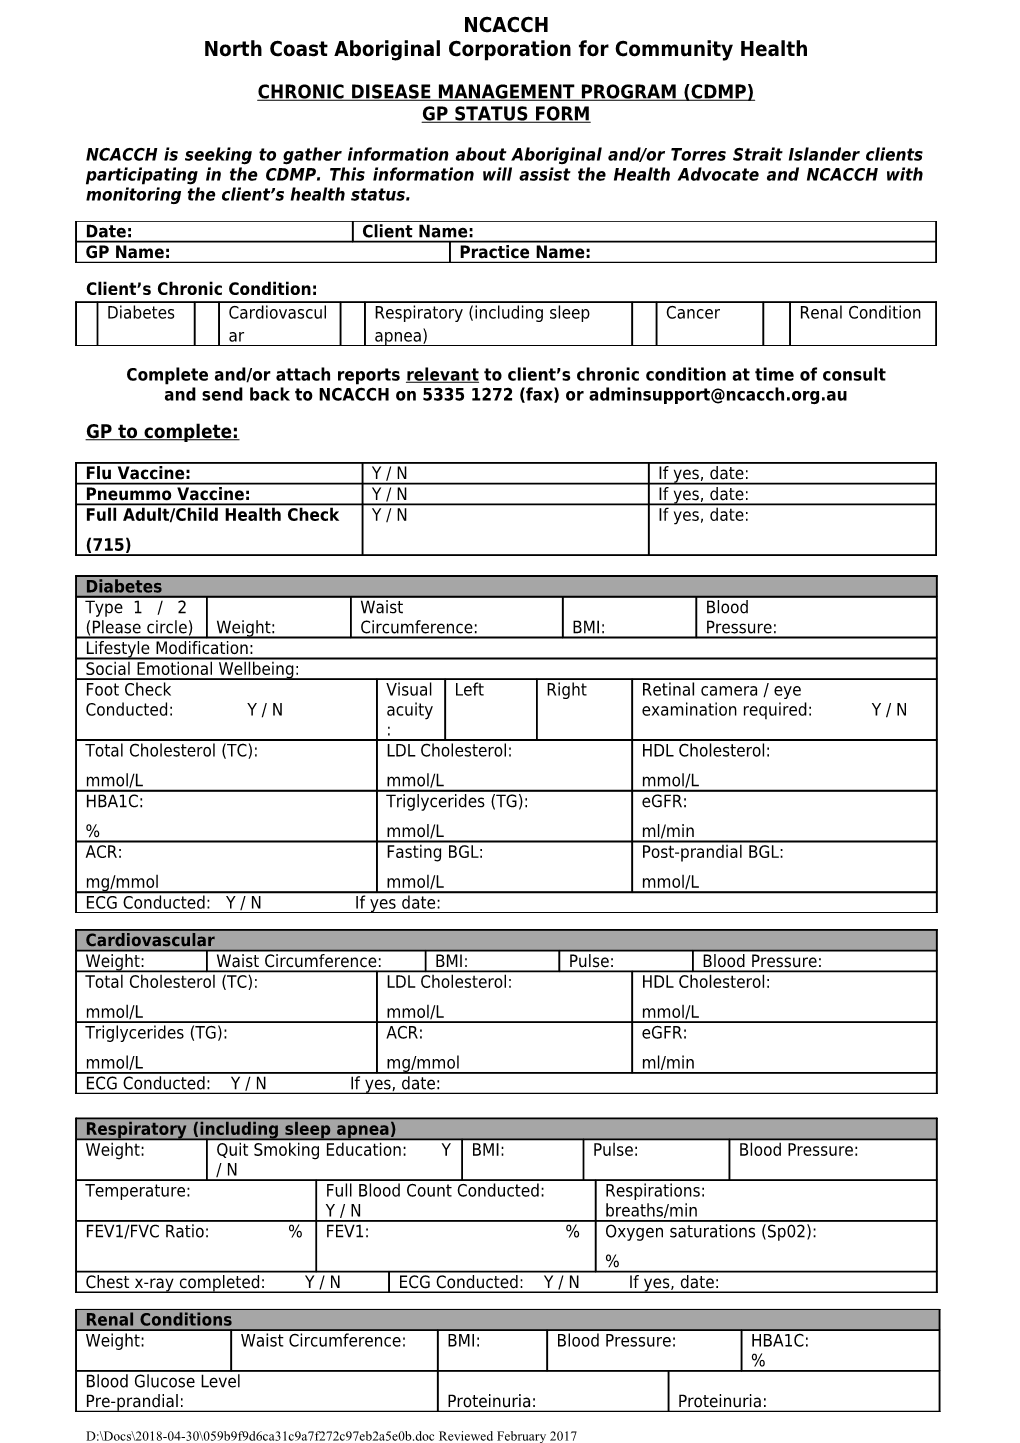 NCACCH Service Access Form 2